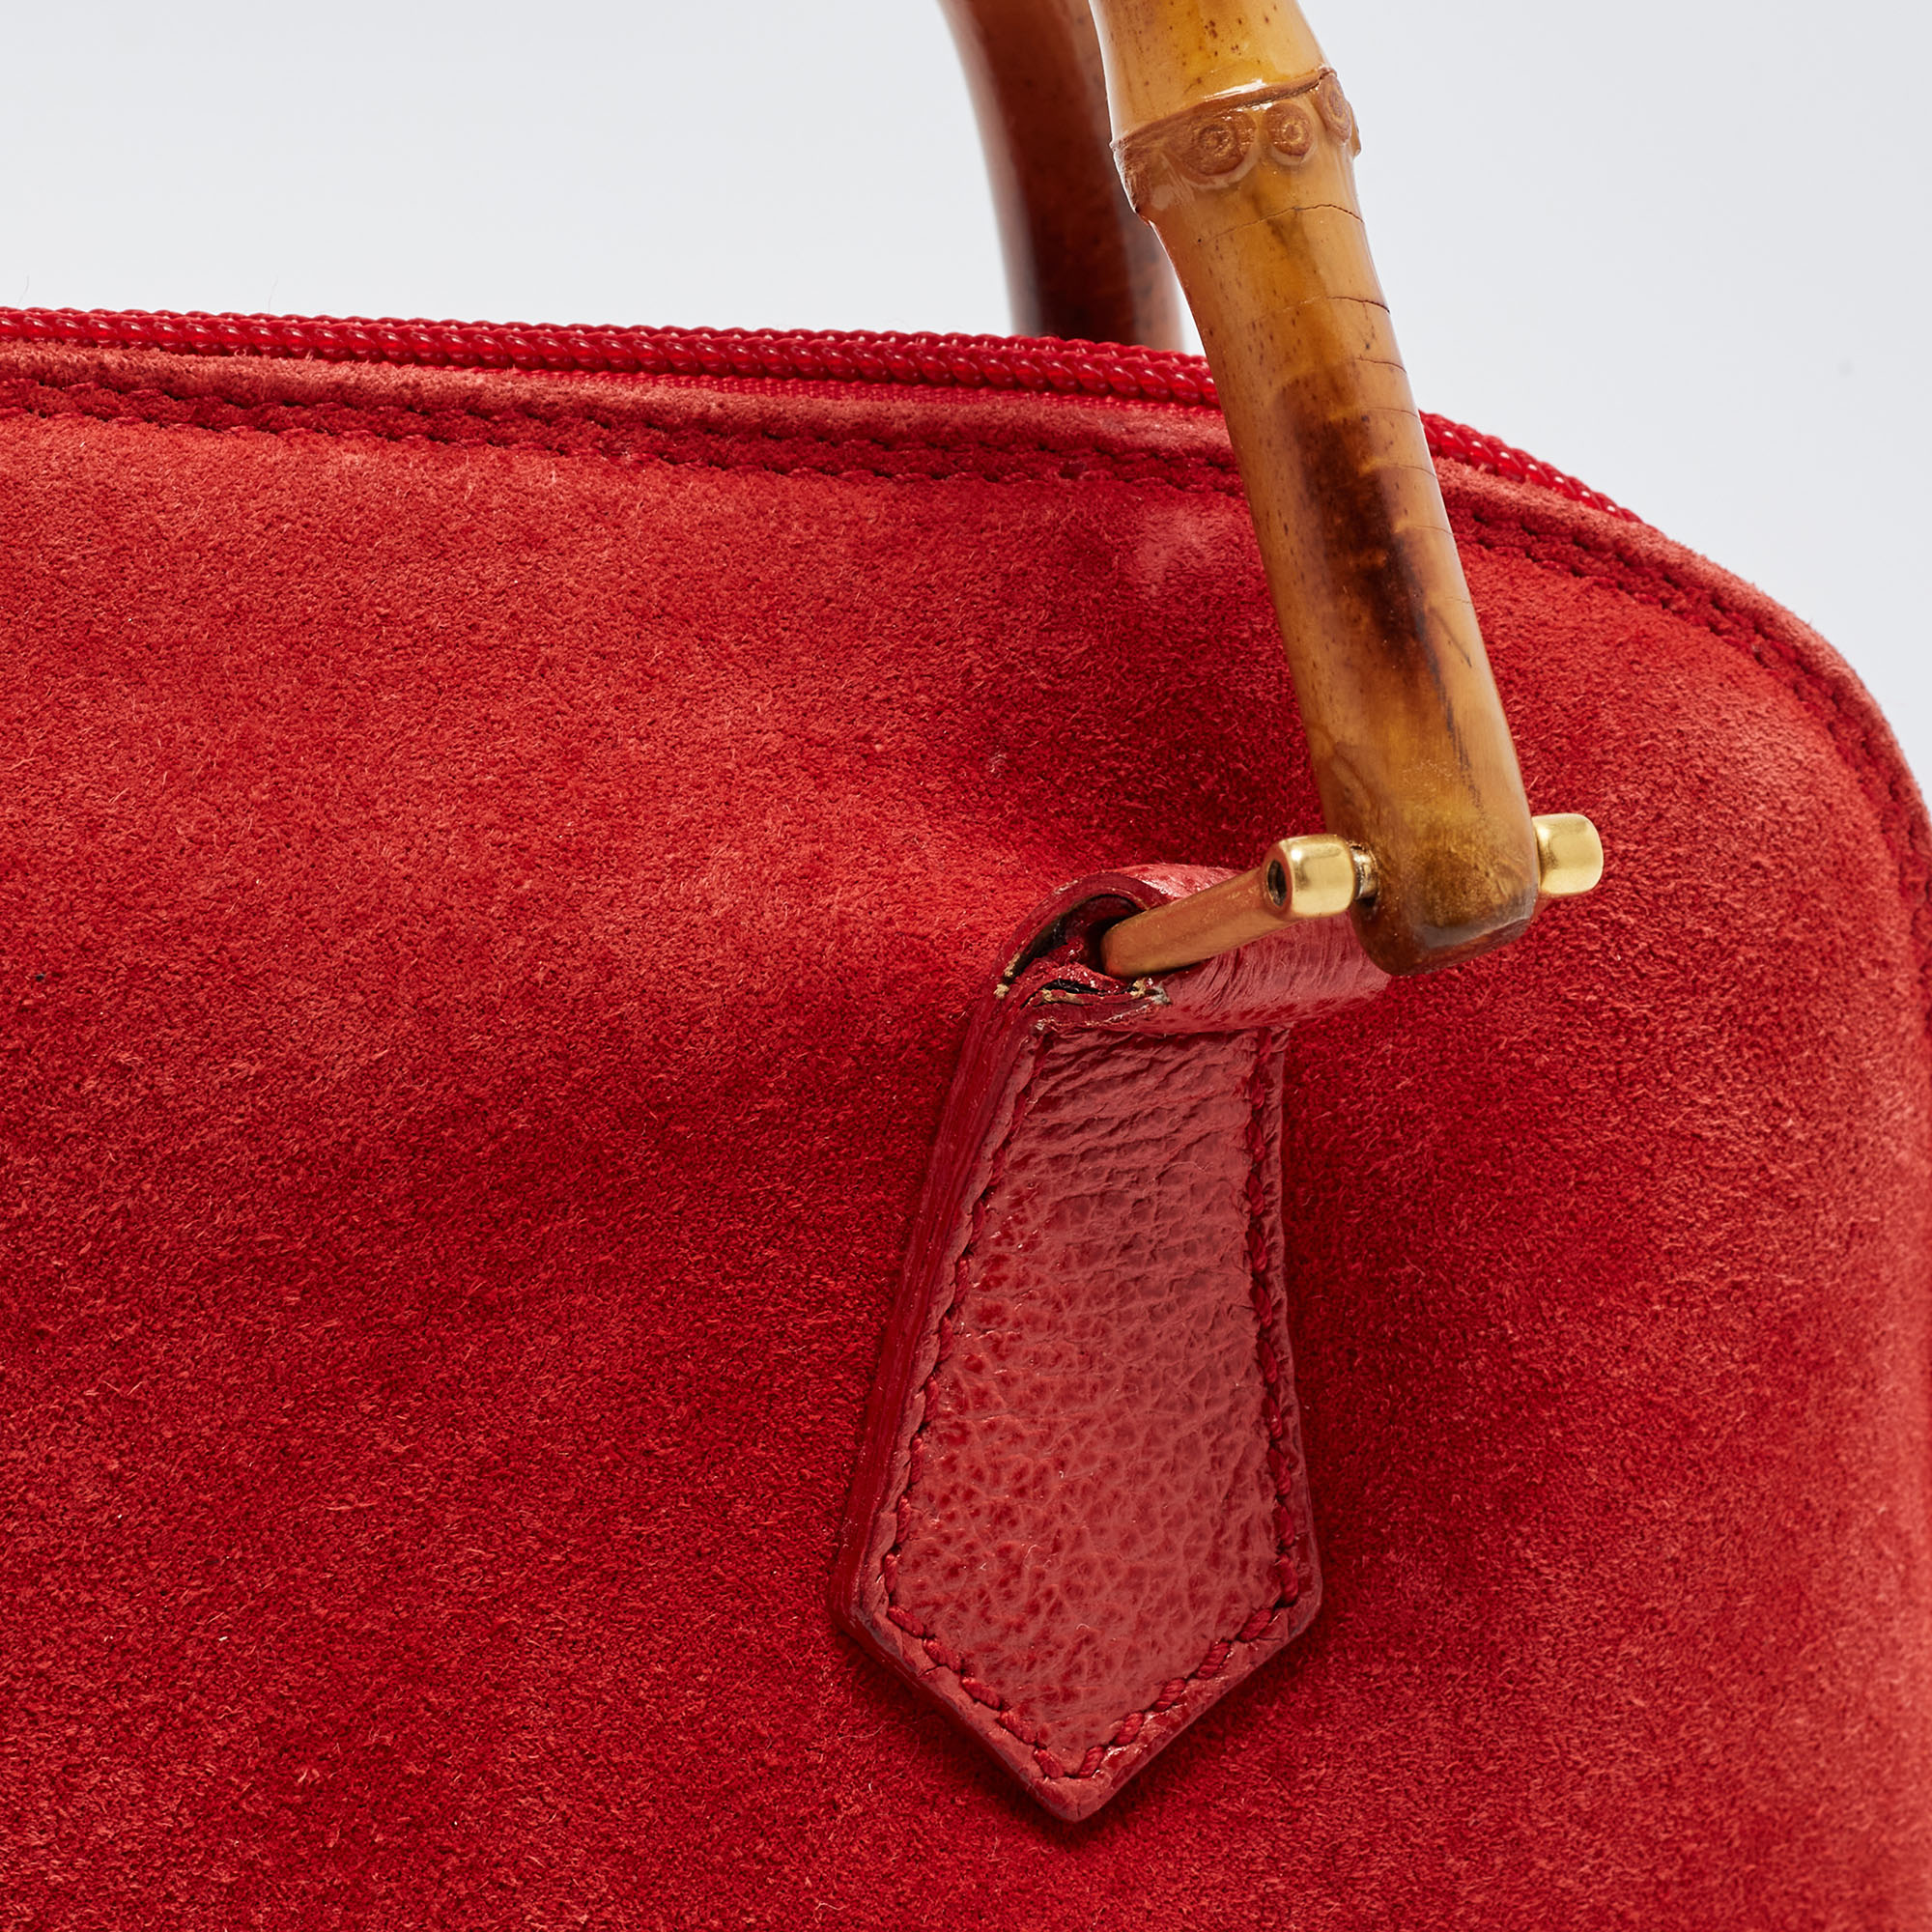 Gucci Red Suede And Leather Bamboo Handle Satchel